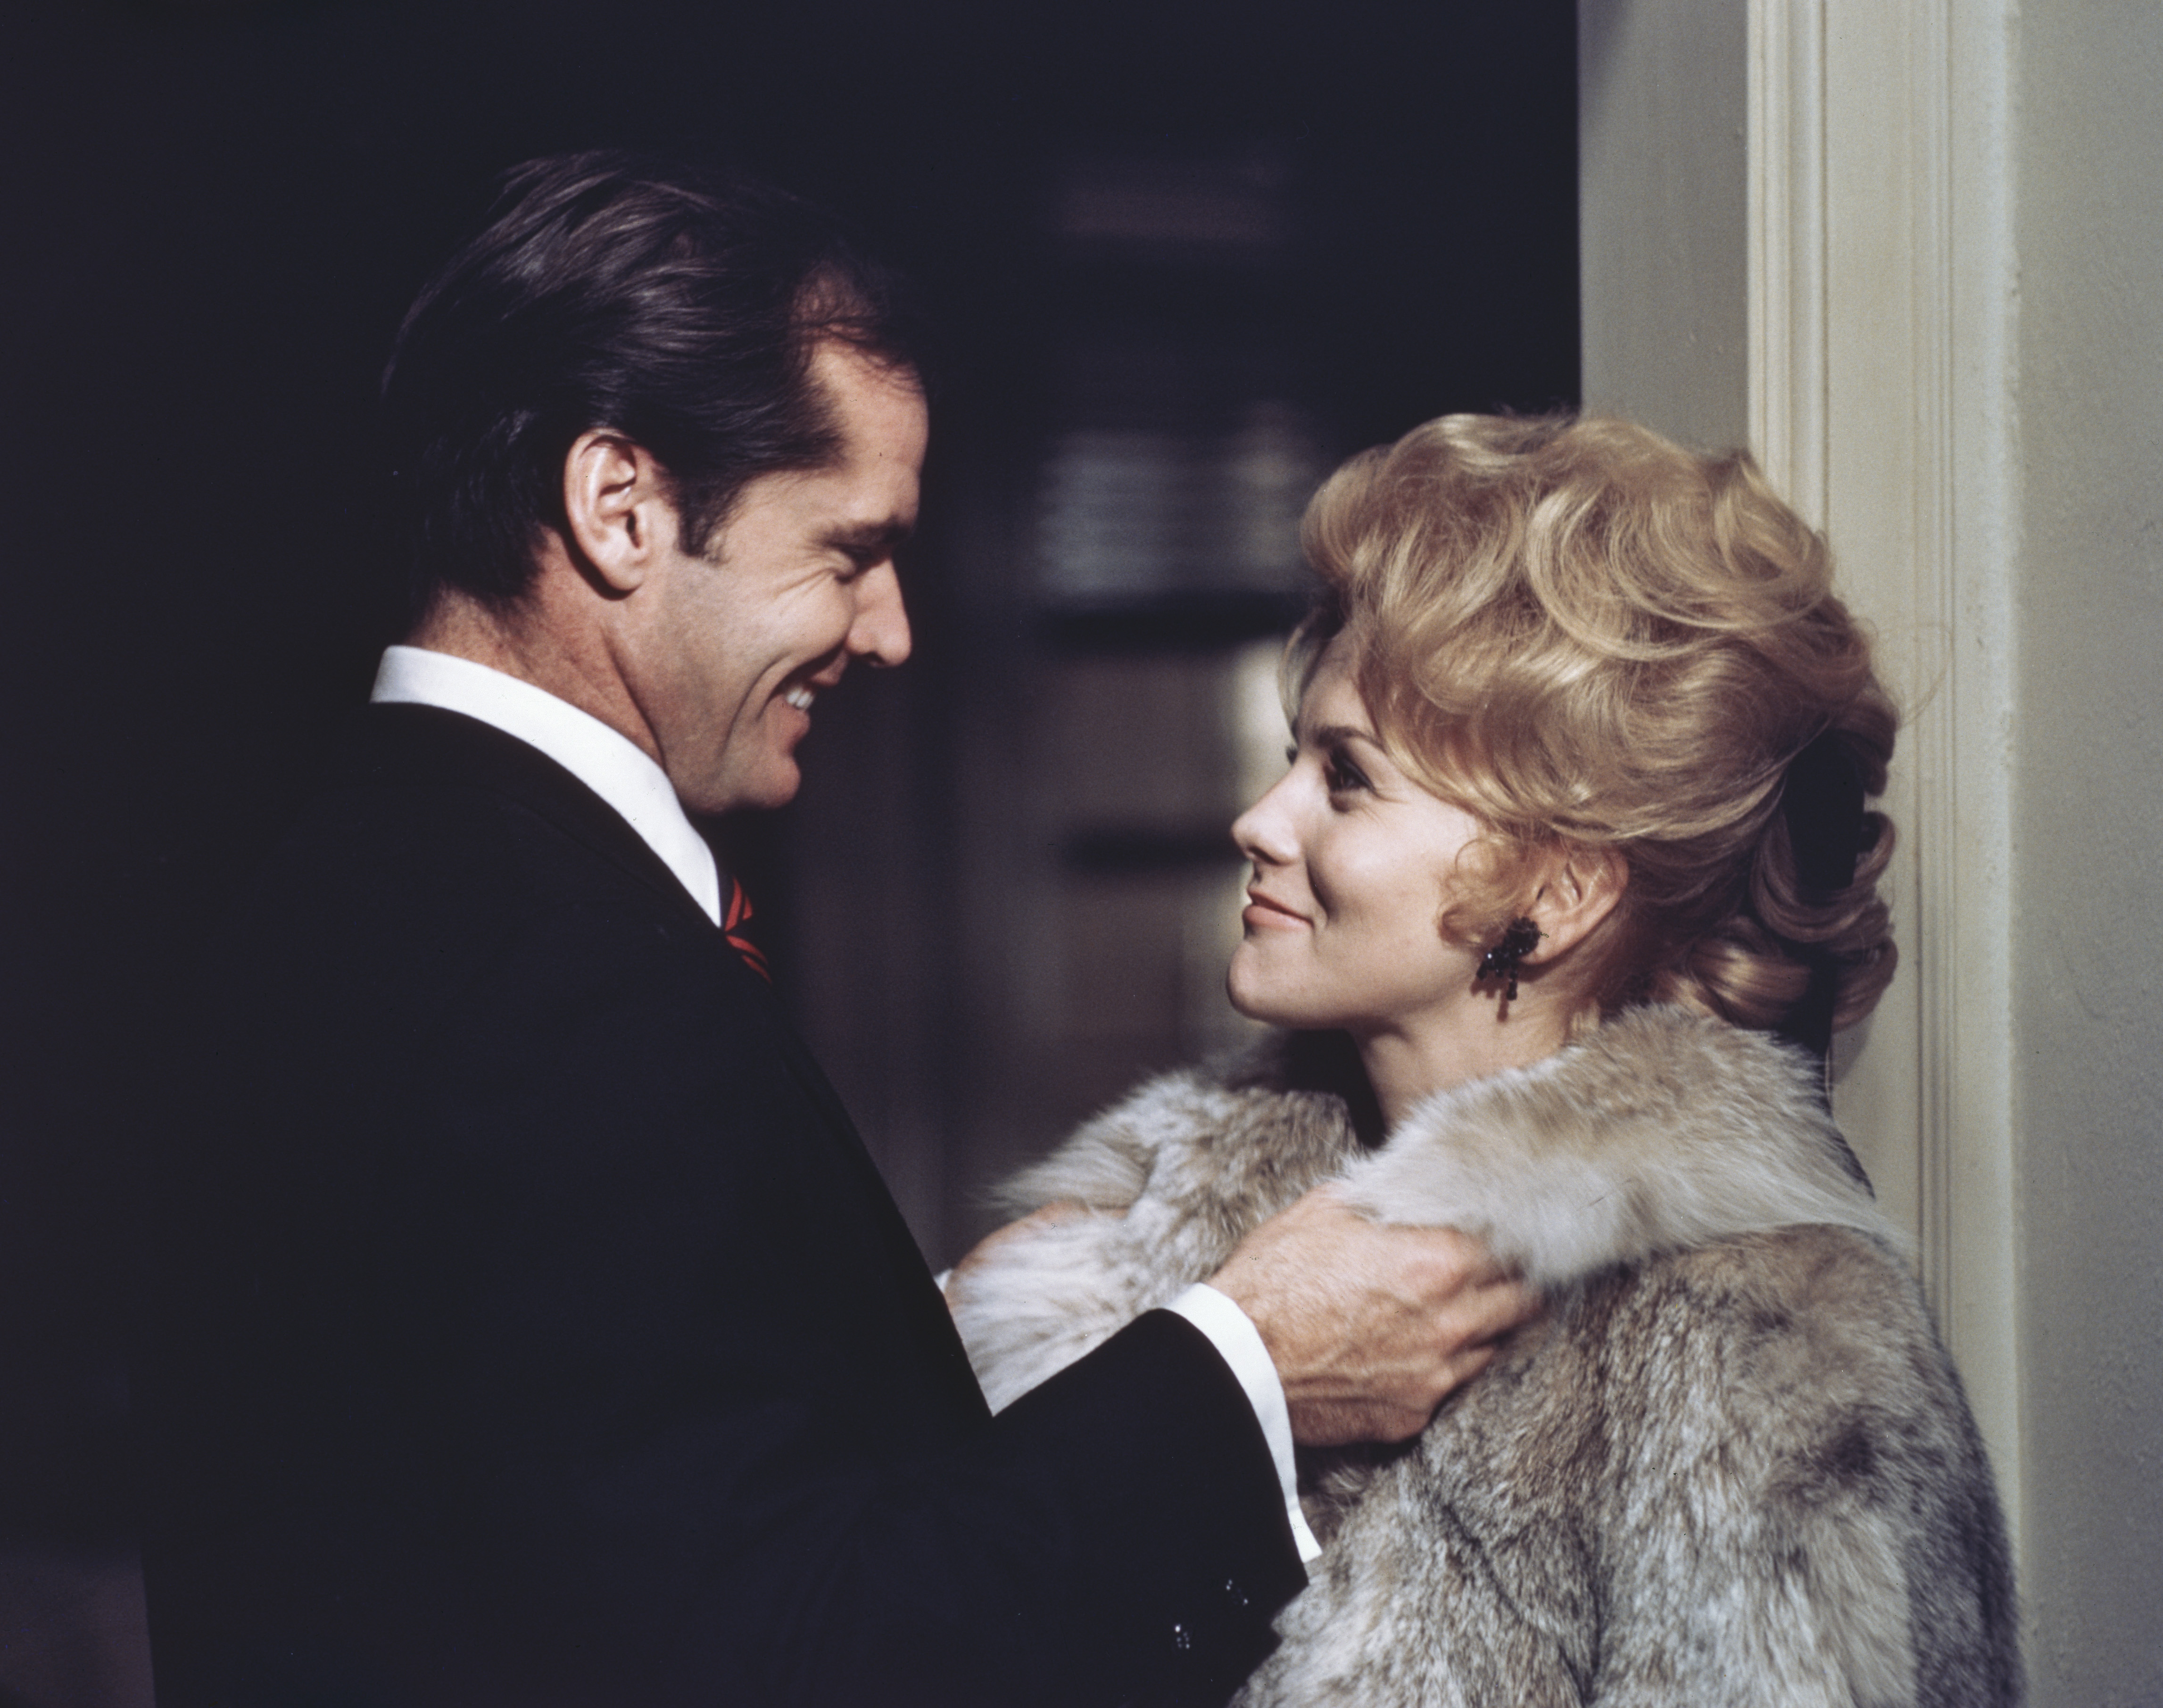 Still of Jack Nicholson and Ann-Margret in Carnal Knowledge (1971)